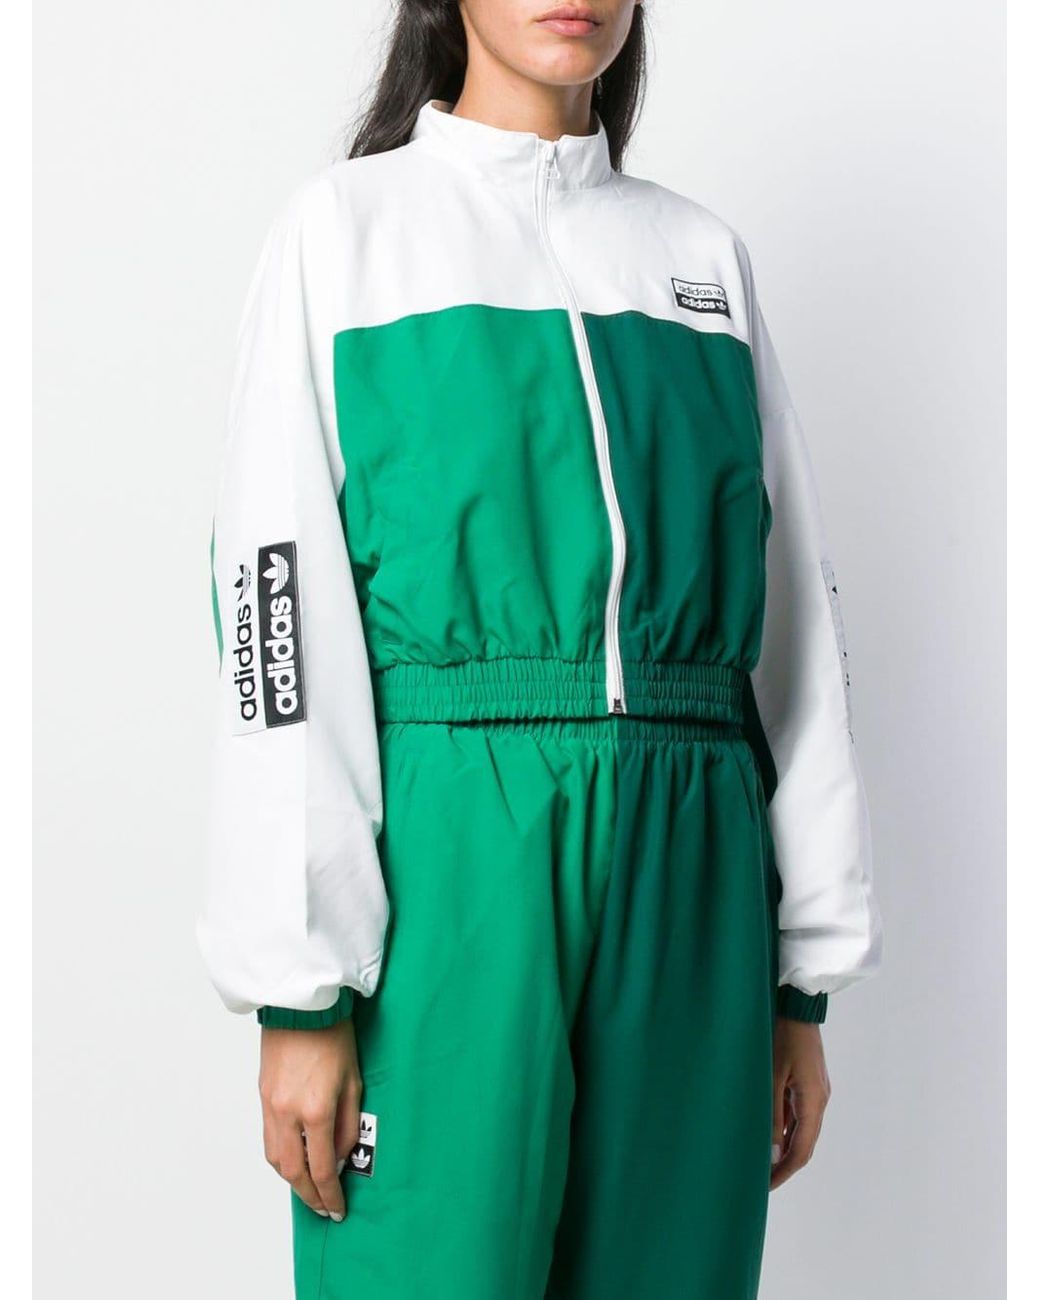 adidas Track Jacket Green in | Cropped Lyst